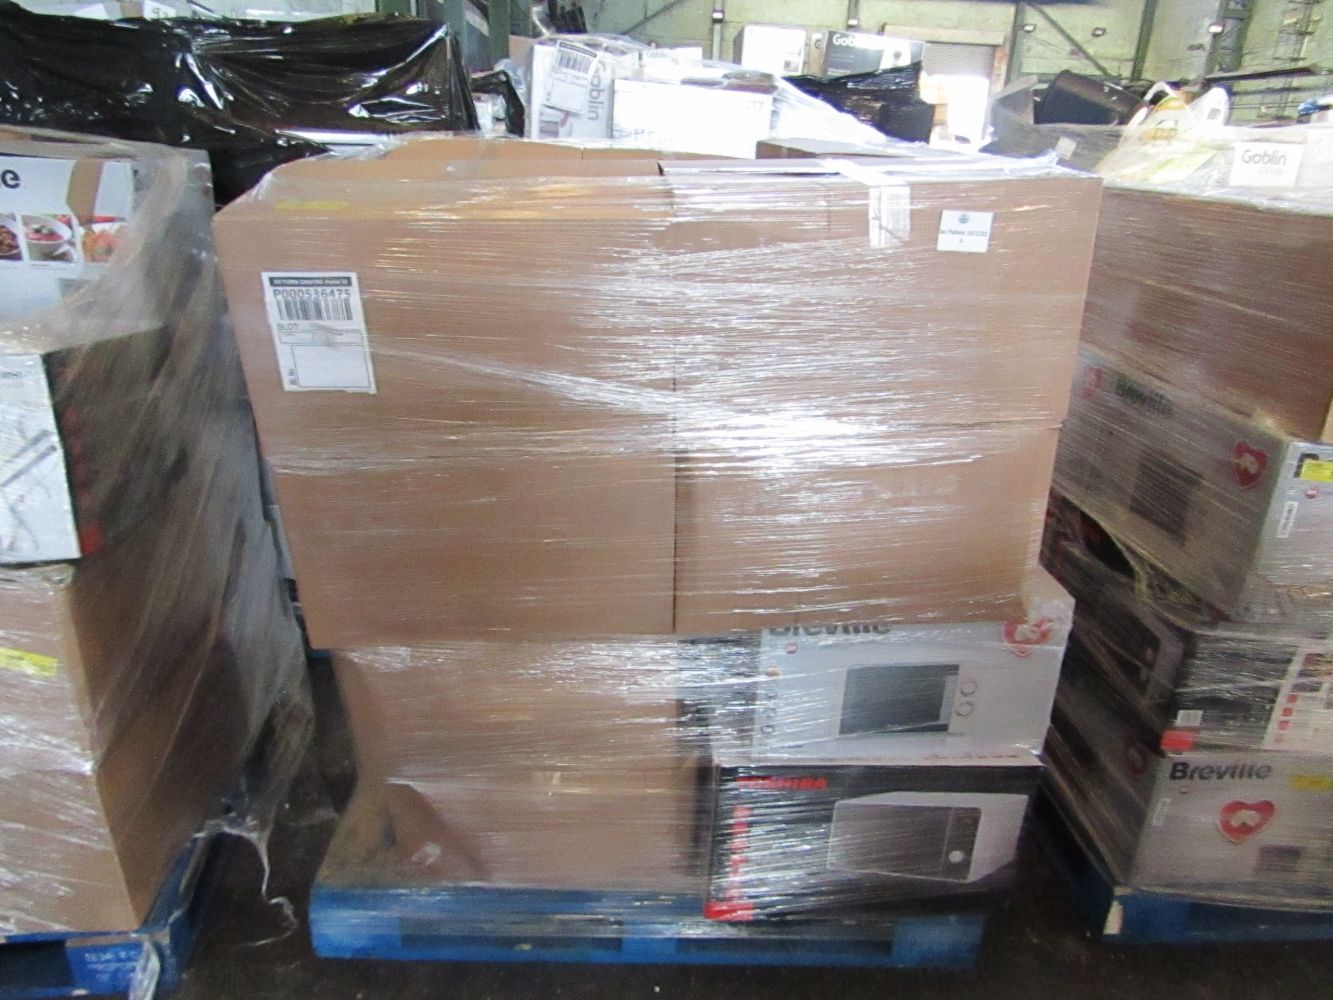 New Delivery of Pallets of Customer return Electricals, Vacuums. Airbeds, Microwaves and more from a Large online Retailer